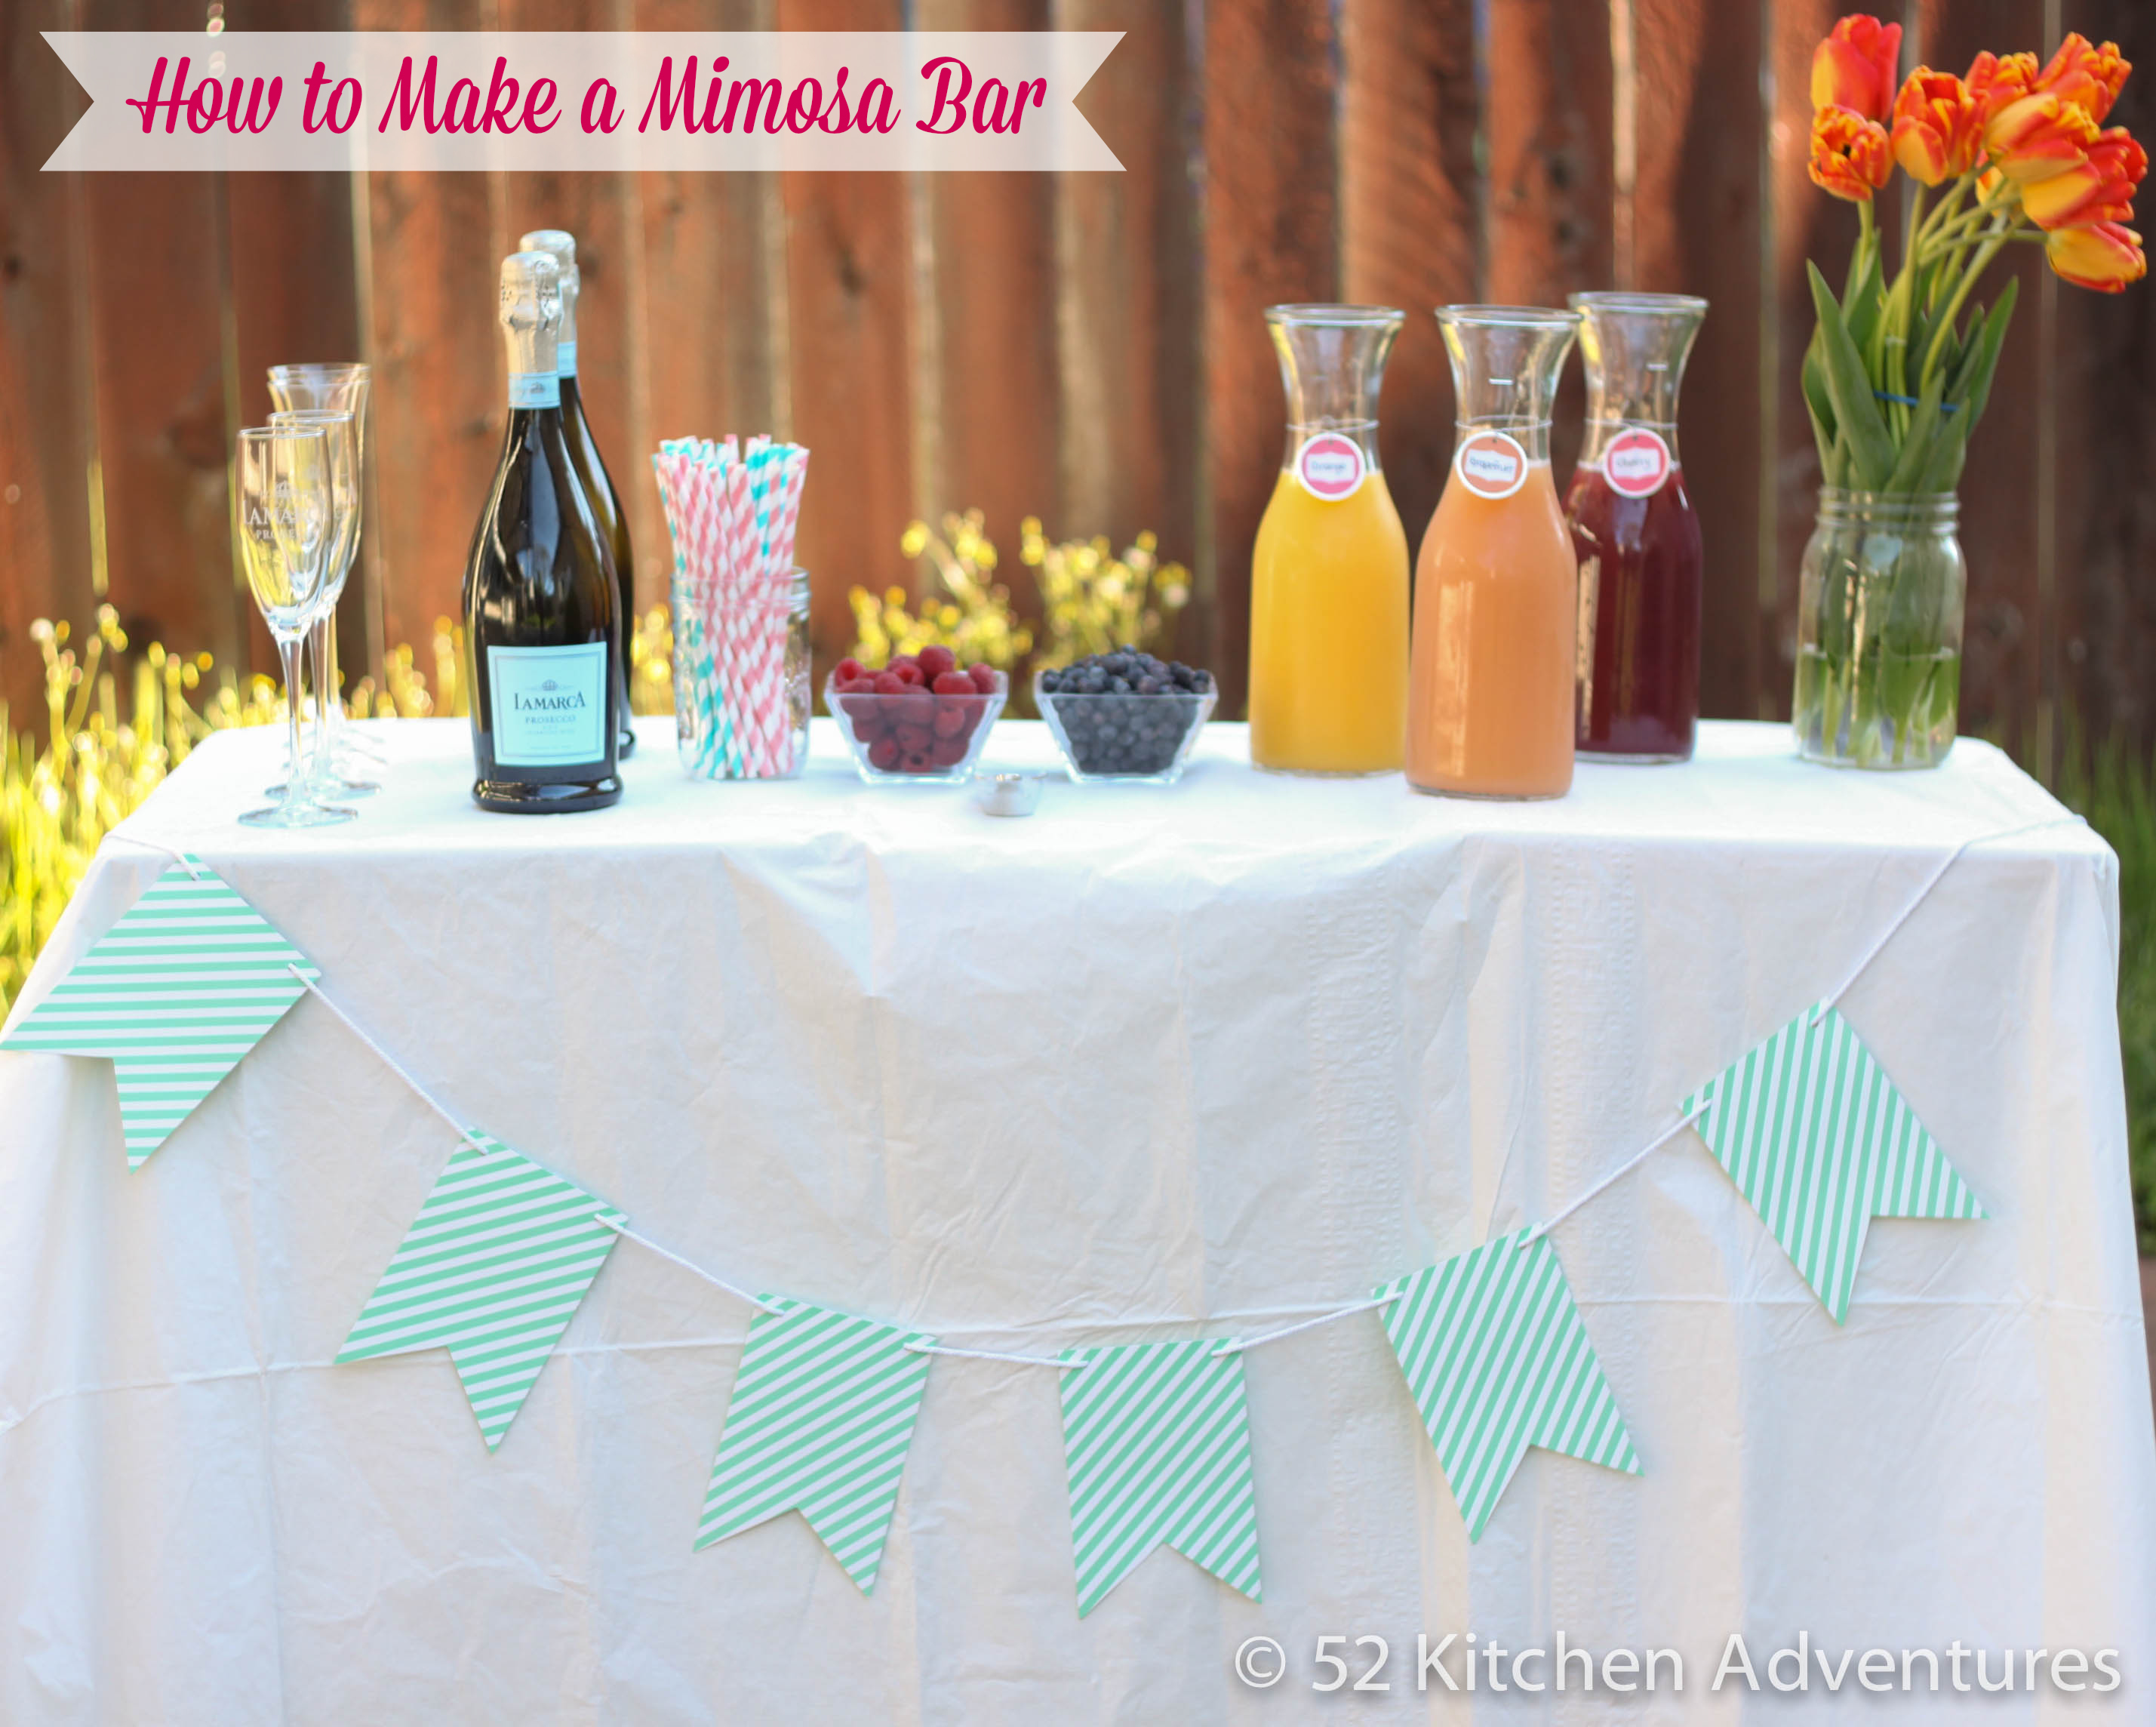 https://www.52kitchenadventures.com/wp-content/uploads/2014/04/How-to-Make-a-Mimosa-Bar.jpg